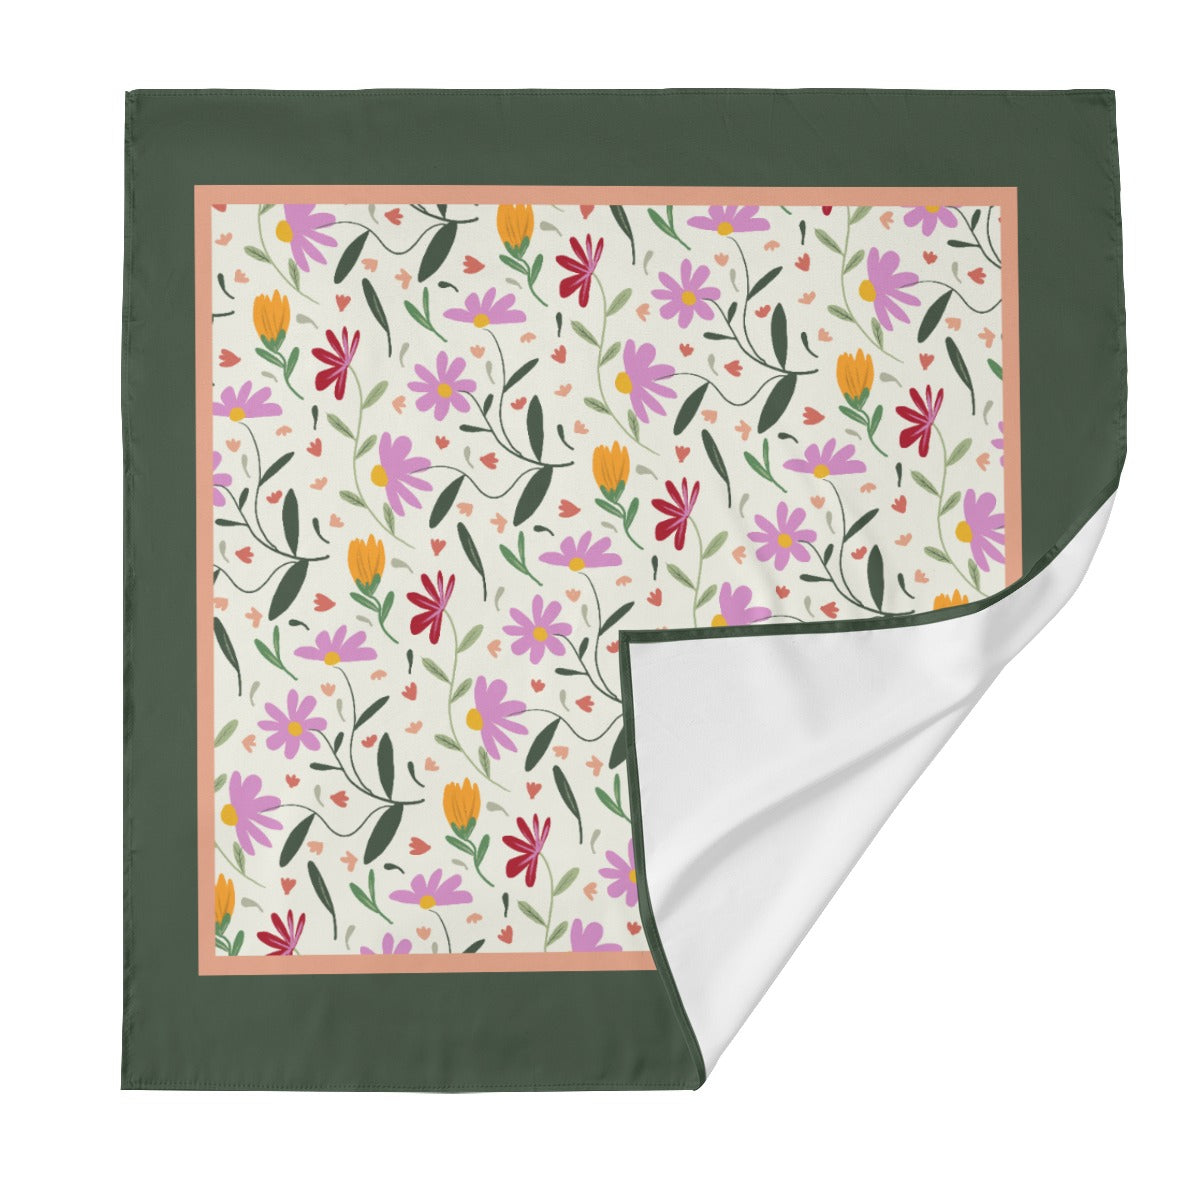 Botanical Off-White Silk Scarf. Pattern hand-painted by the Designer Maria Alejandra Echenique